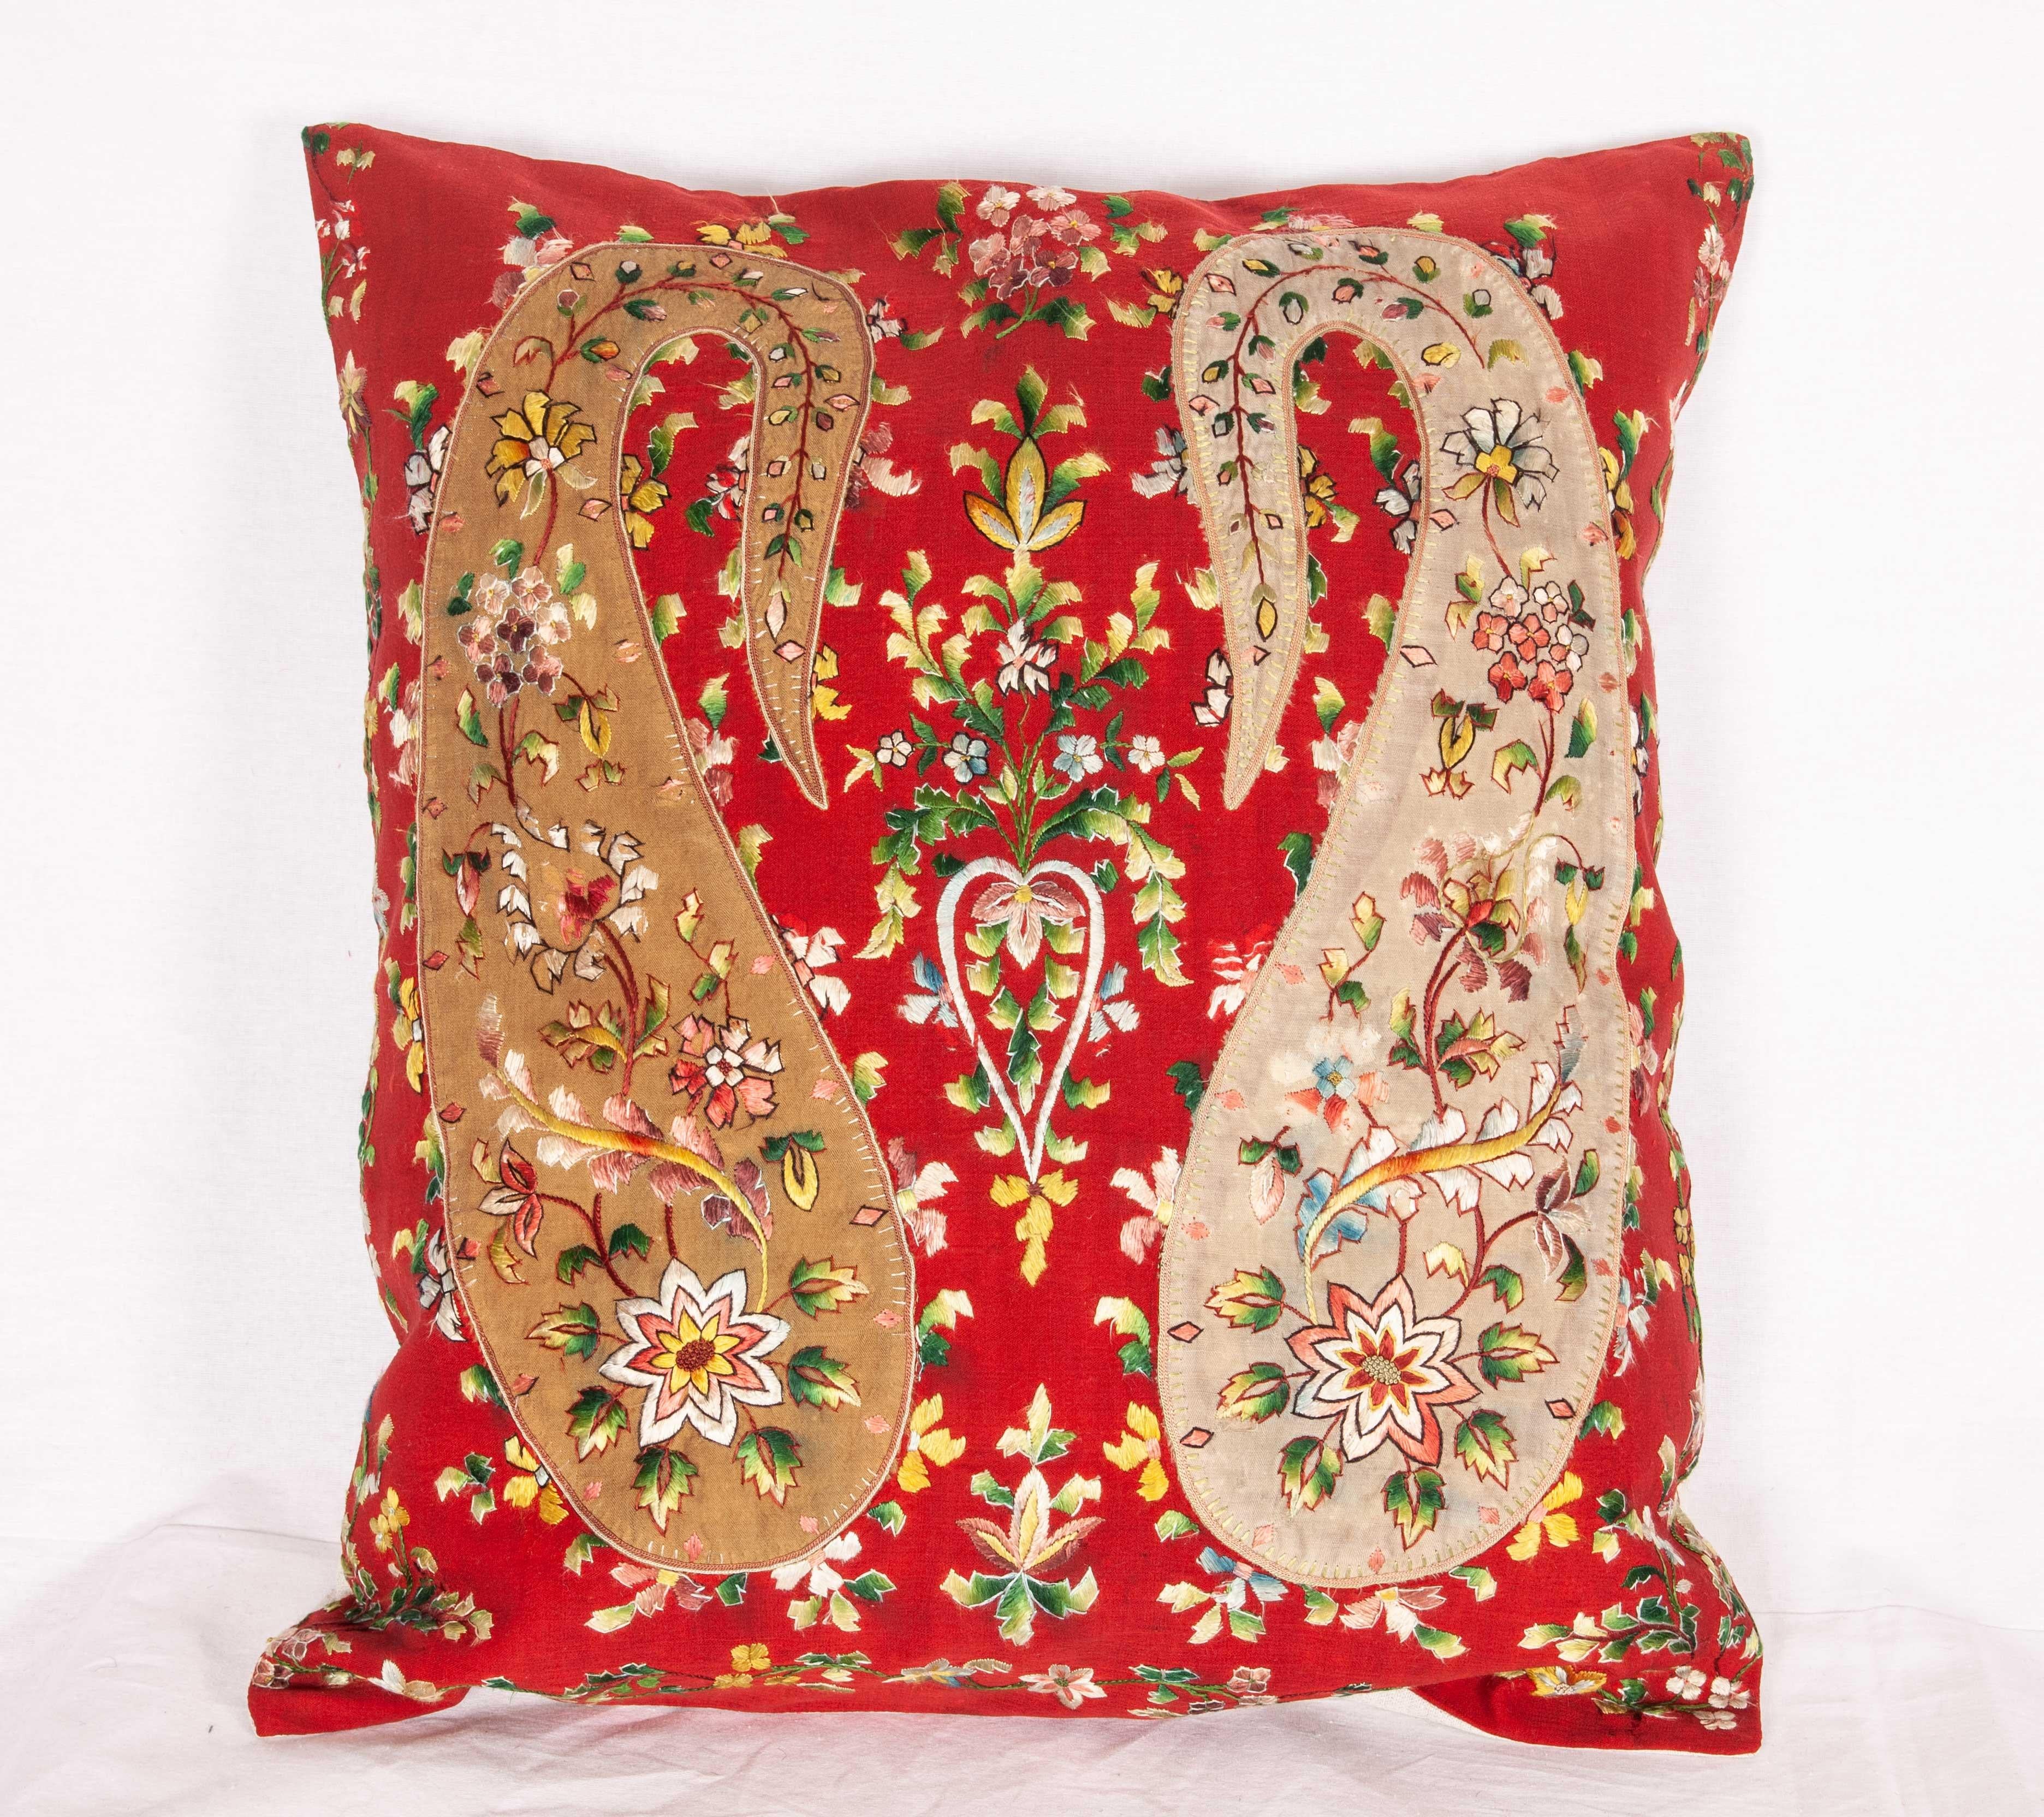 Embroidered Pillow Cases Fashioned from an Early 20th Century Indian Shawl For Sale